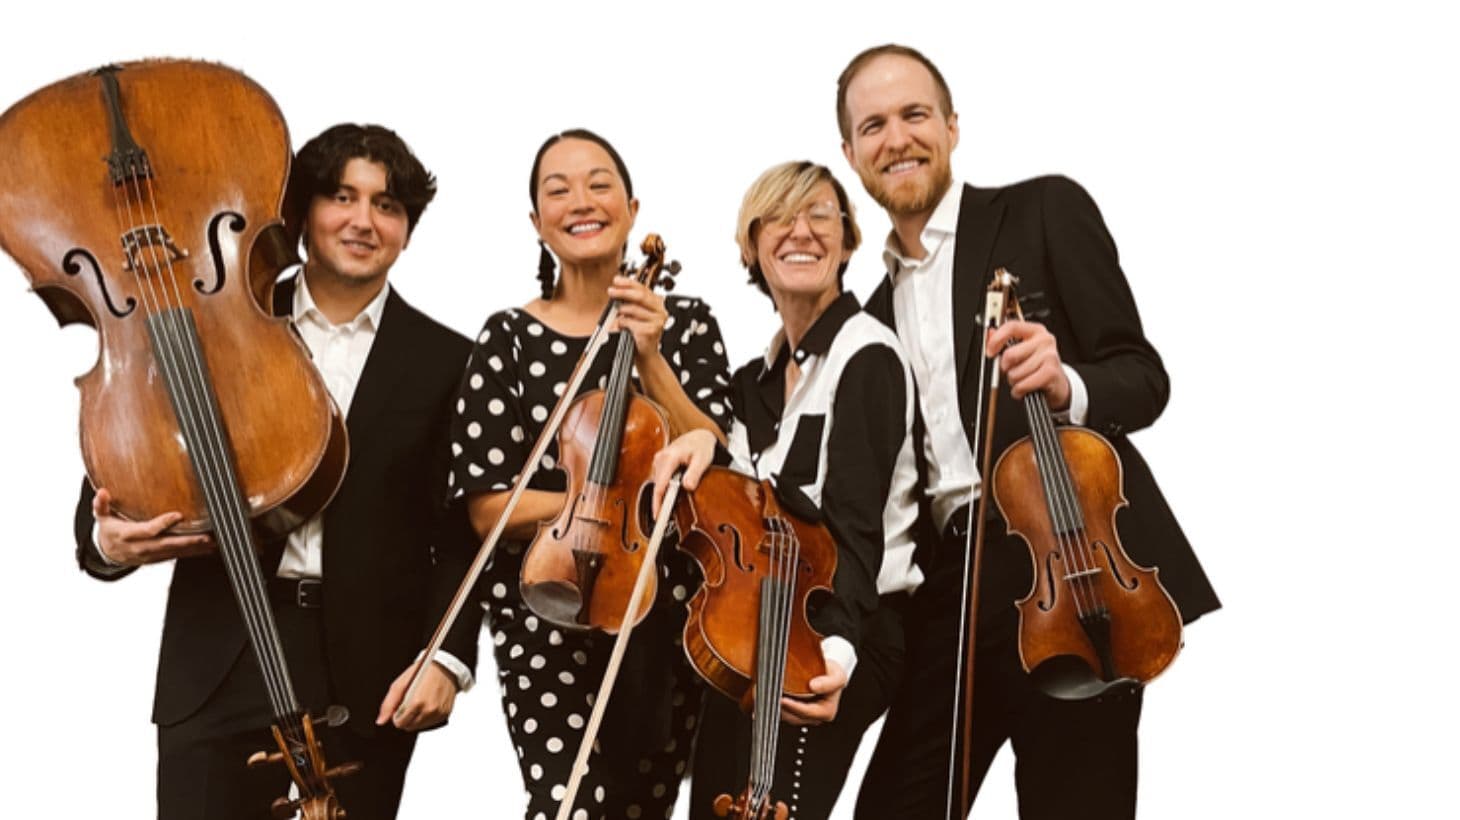 The four members of the Thalea String Quartet pose for a picture with their string instruments.